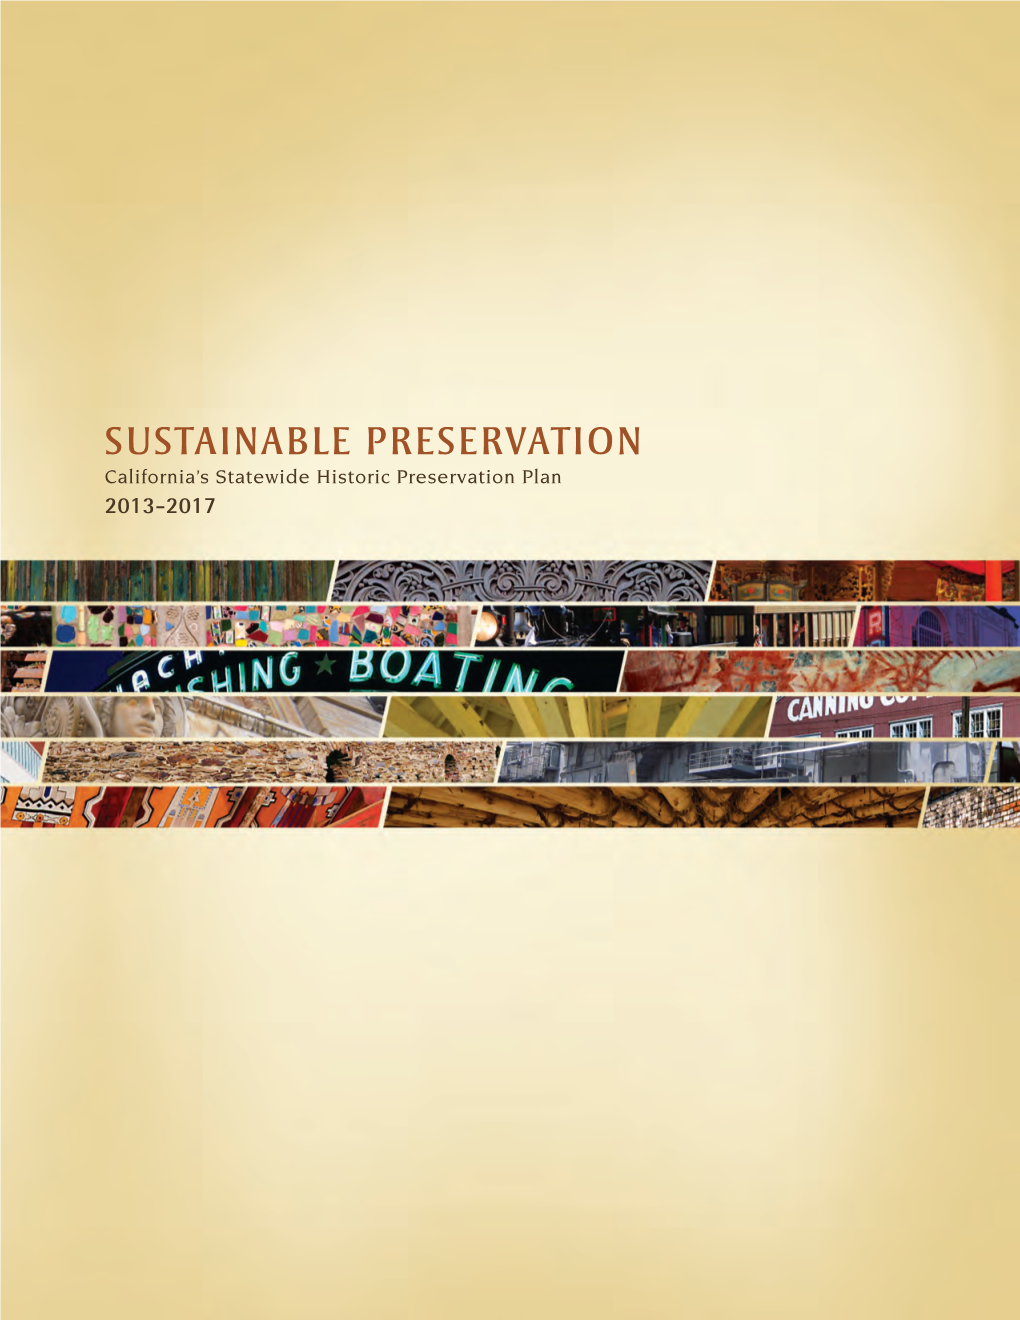 California's Statewide Historic Preservation Plan, 2013-2017